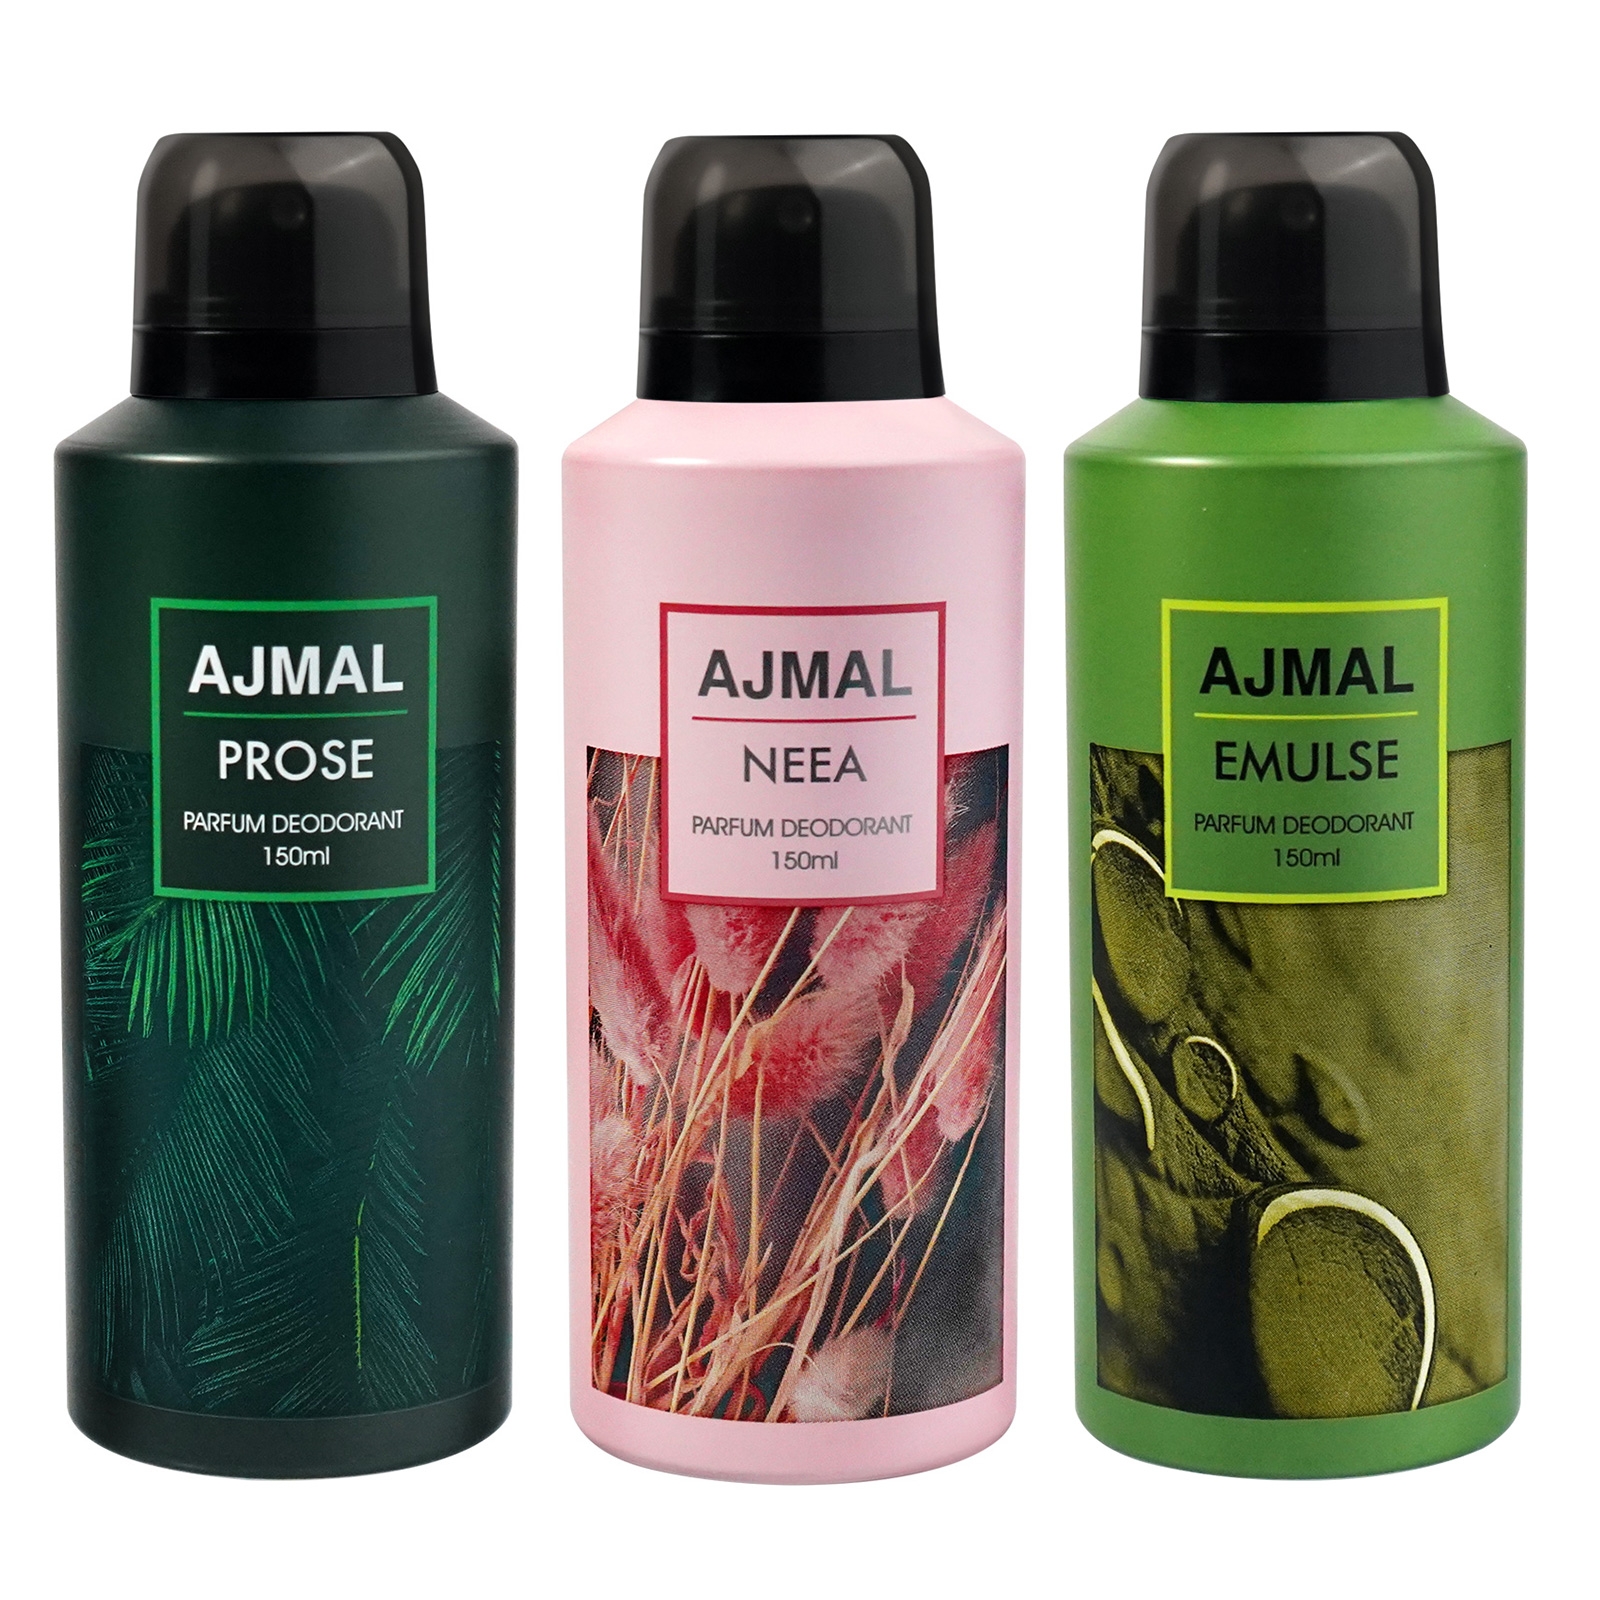 Ajmal Prose, Neea and Emulse Deodorant Perfume 150ML Each Long Lasting Spray Party Wear Gift For Men and Women Online Exclusive